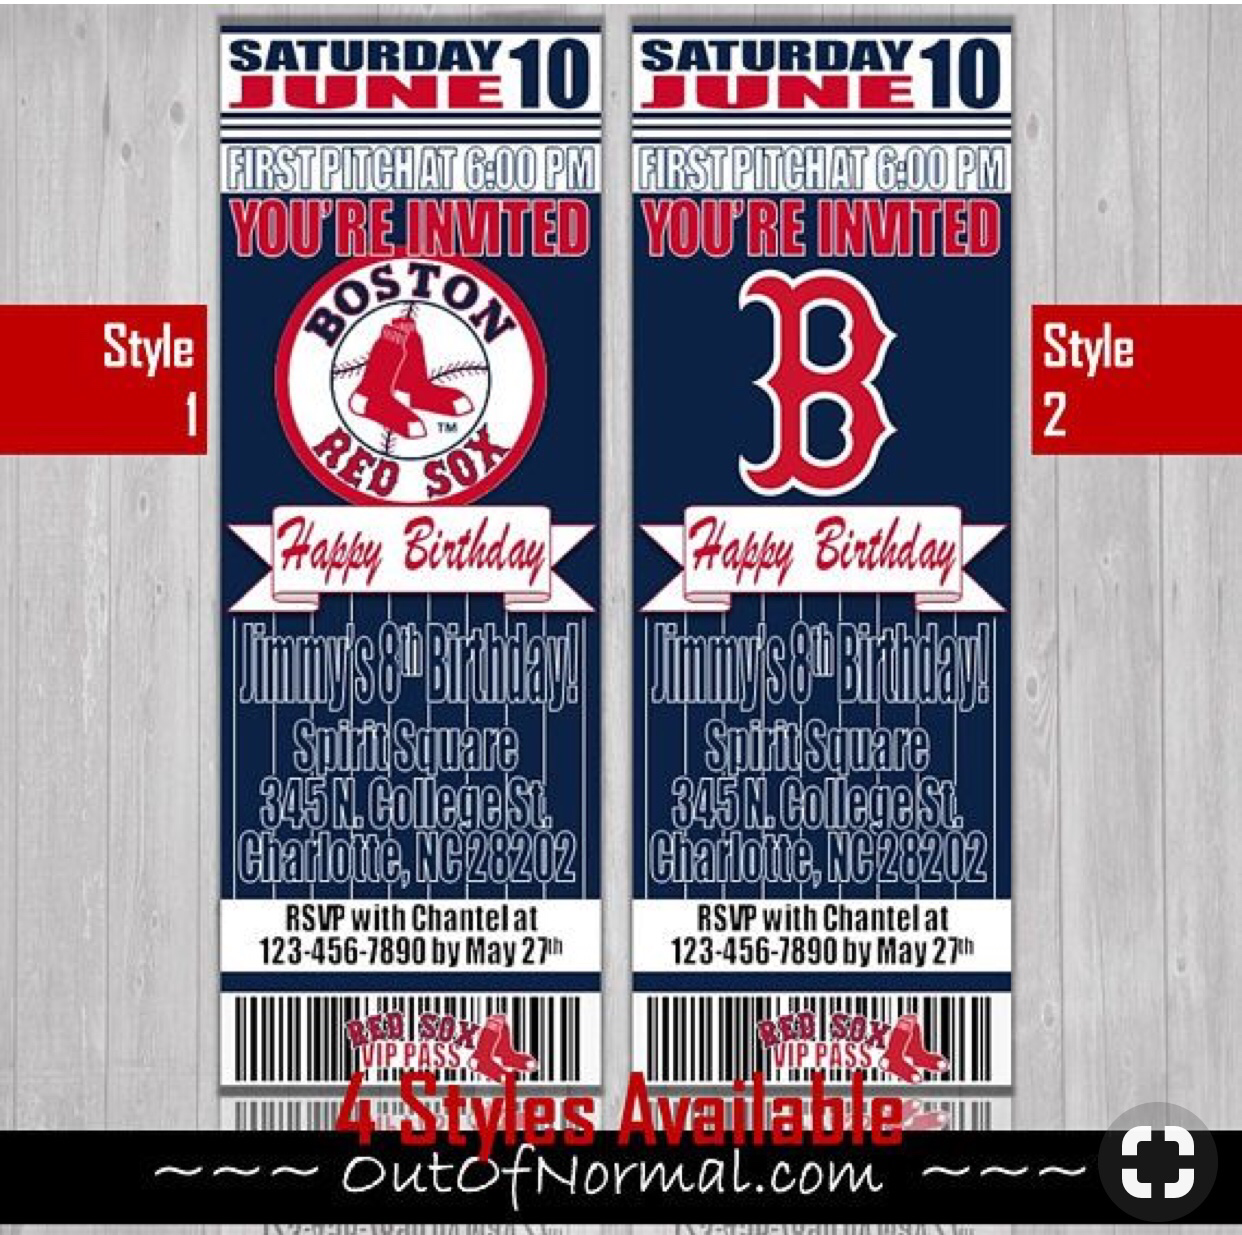 blank red sox tickets